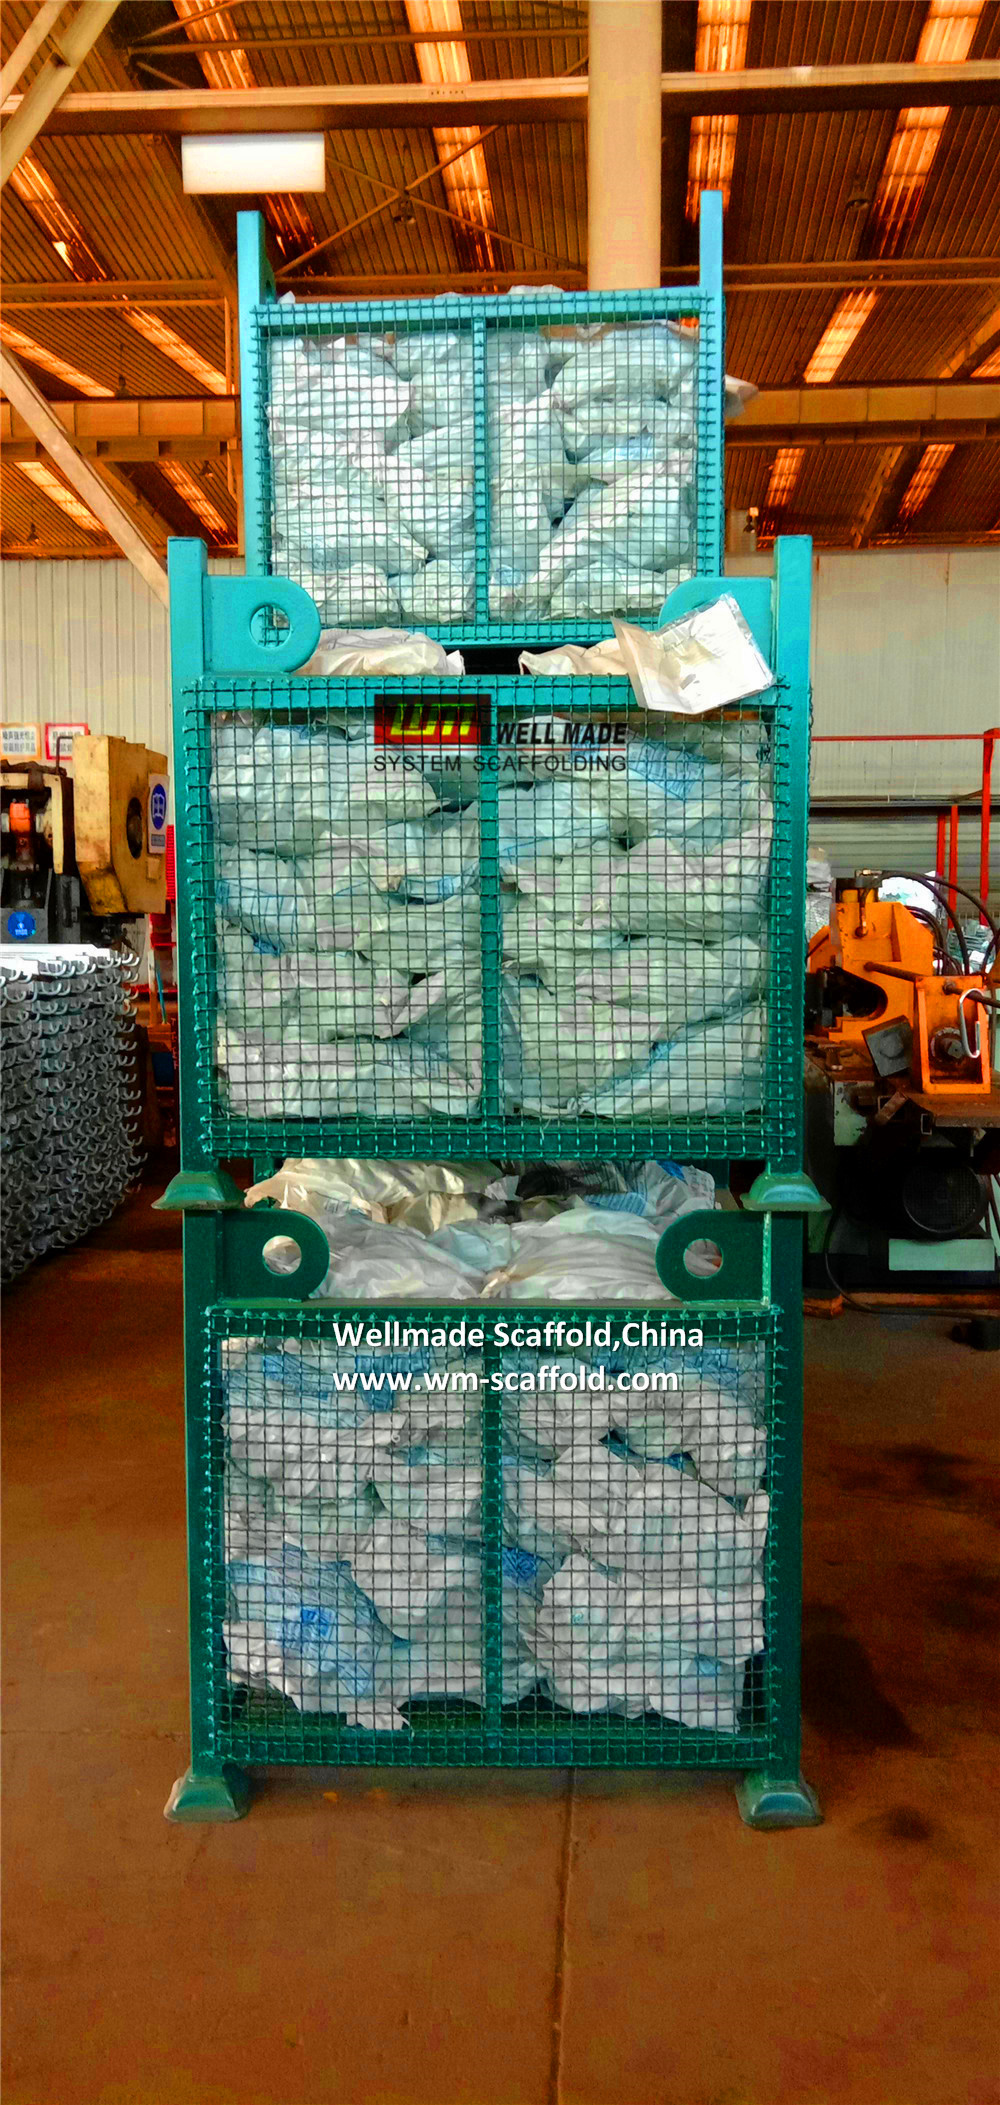 Painted scaffold cages for scaffolding storage and transportation with lifting eye hooks -construction materials- steel building